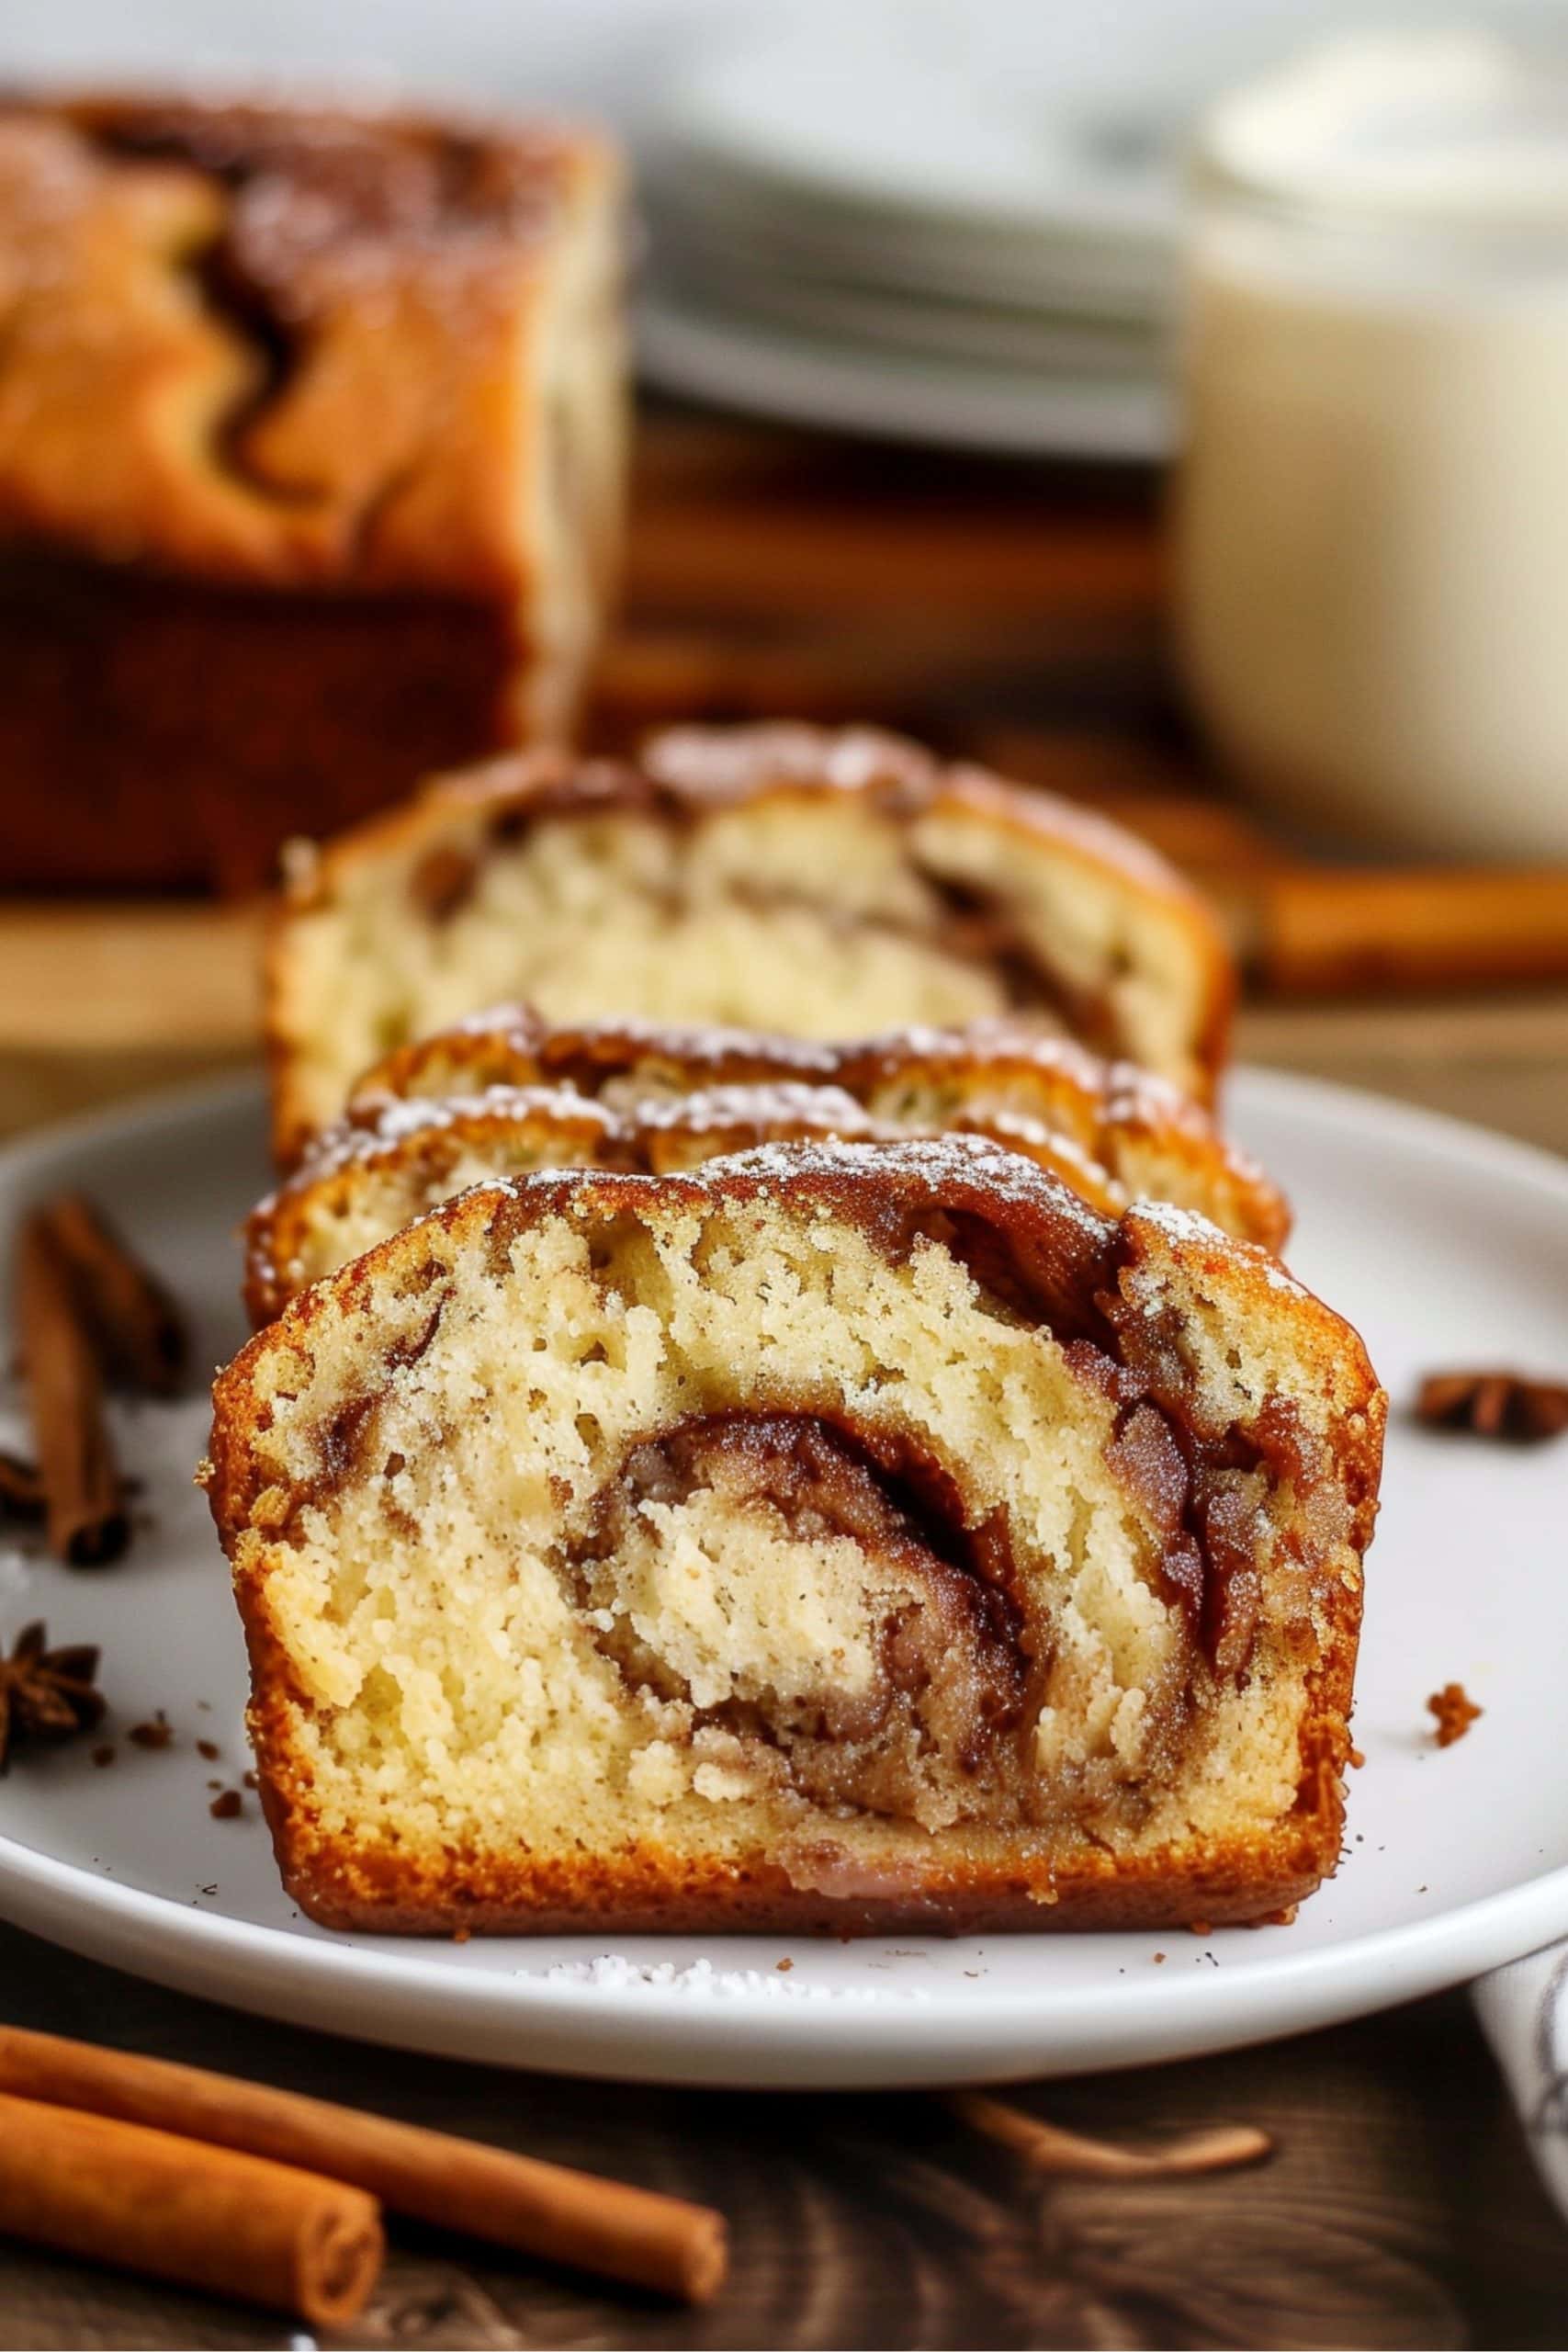 A close-up of a freshly baked cinnamon swirl quick bread, with its golden-brown crust in a white plate.